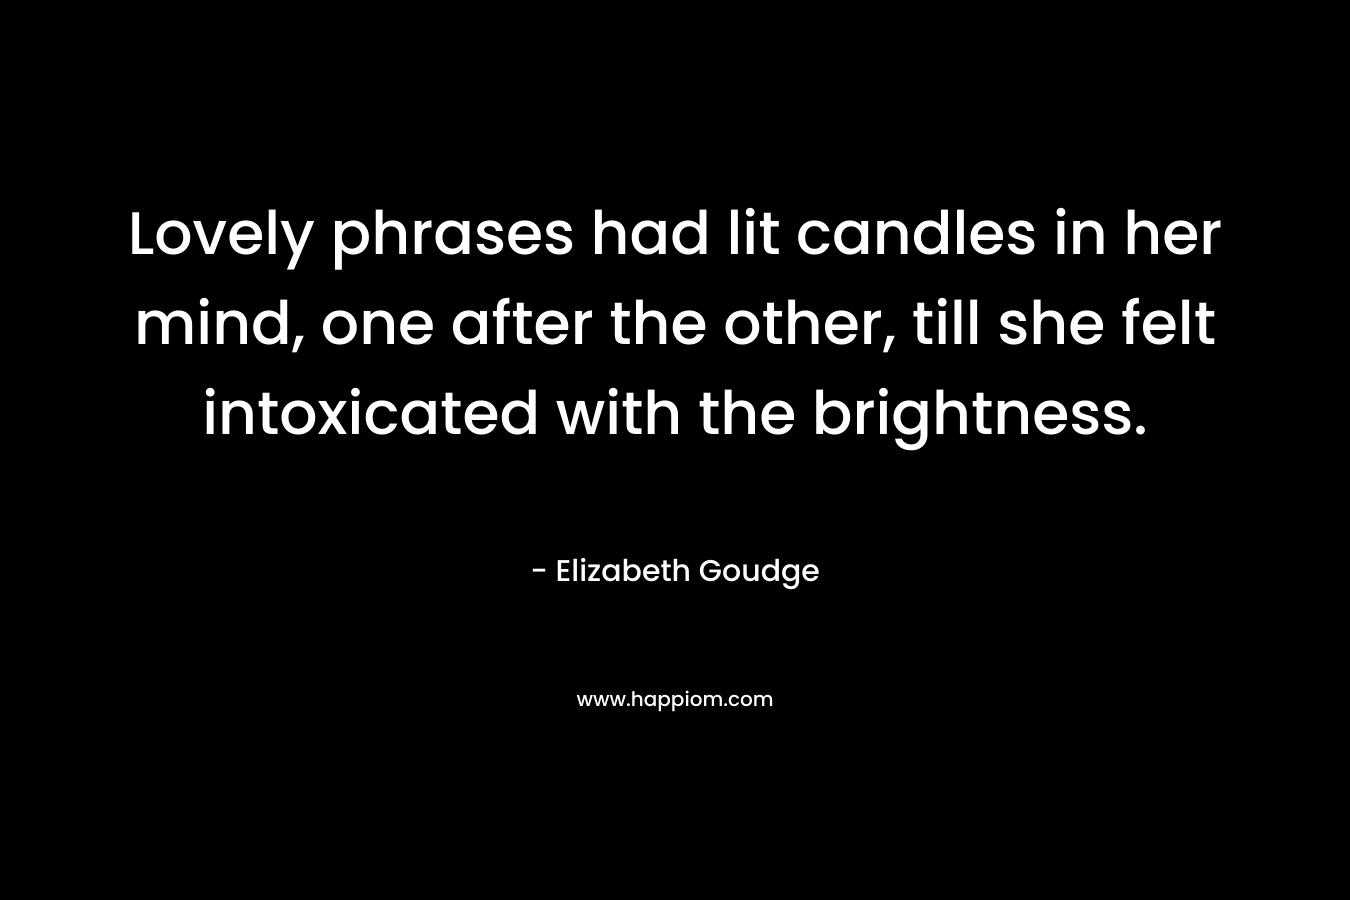 Lovely phrases had lit candles in her mind, one after the other, till she felt intoxicated with the brightness.